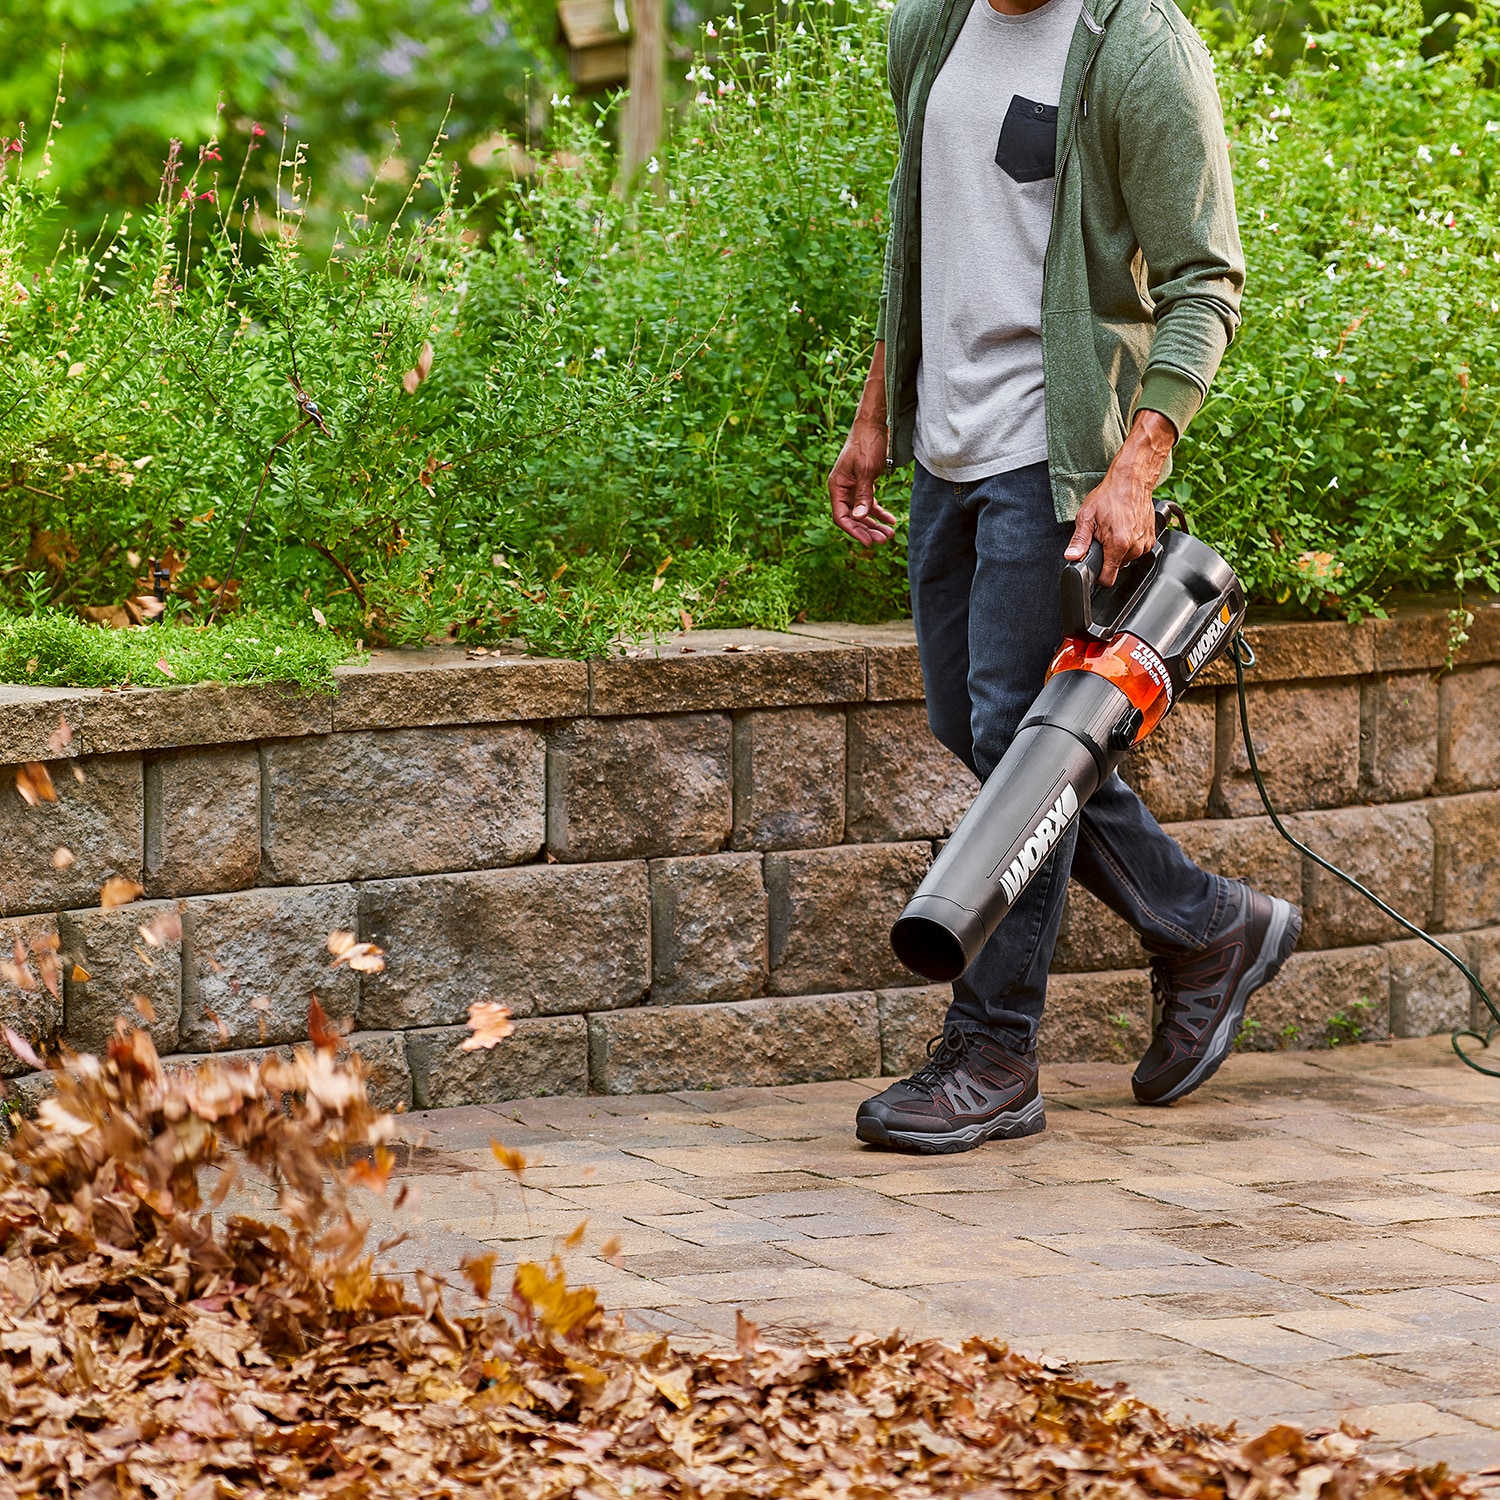 The Best Leaf Blower For Drying Your Car: Worx WG520